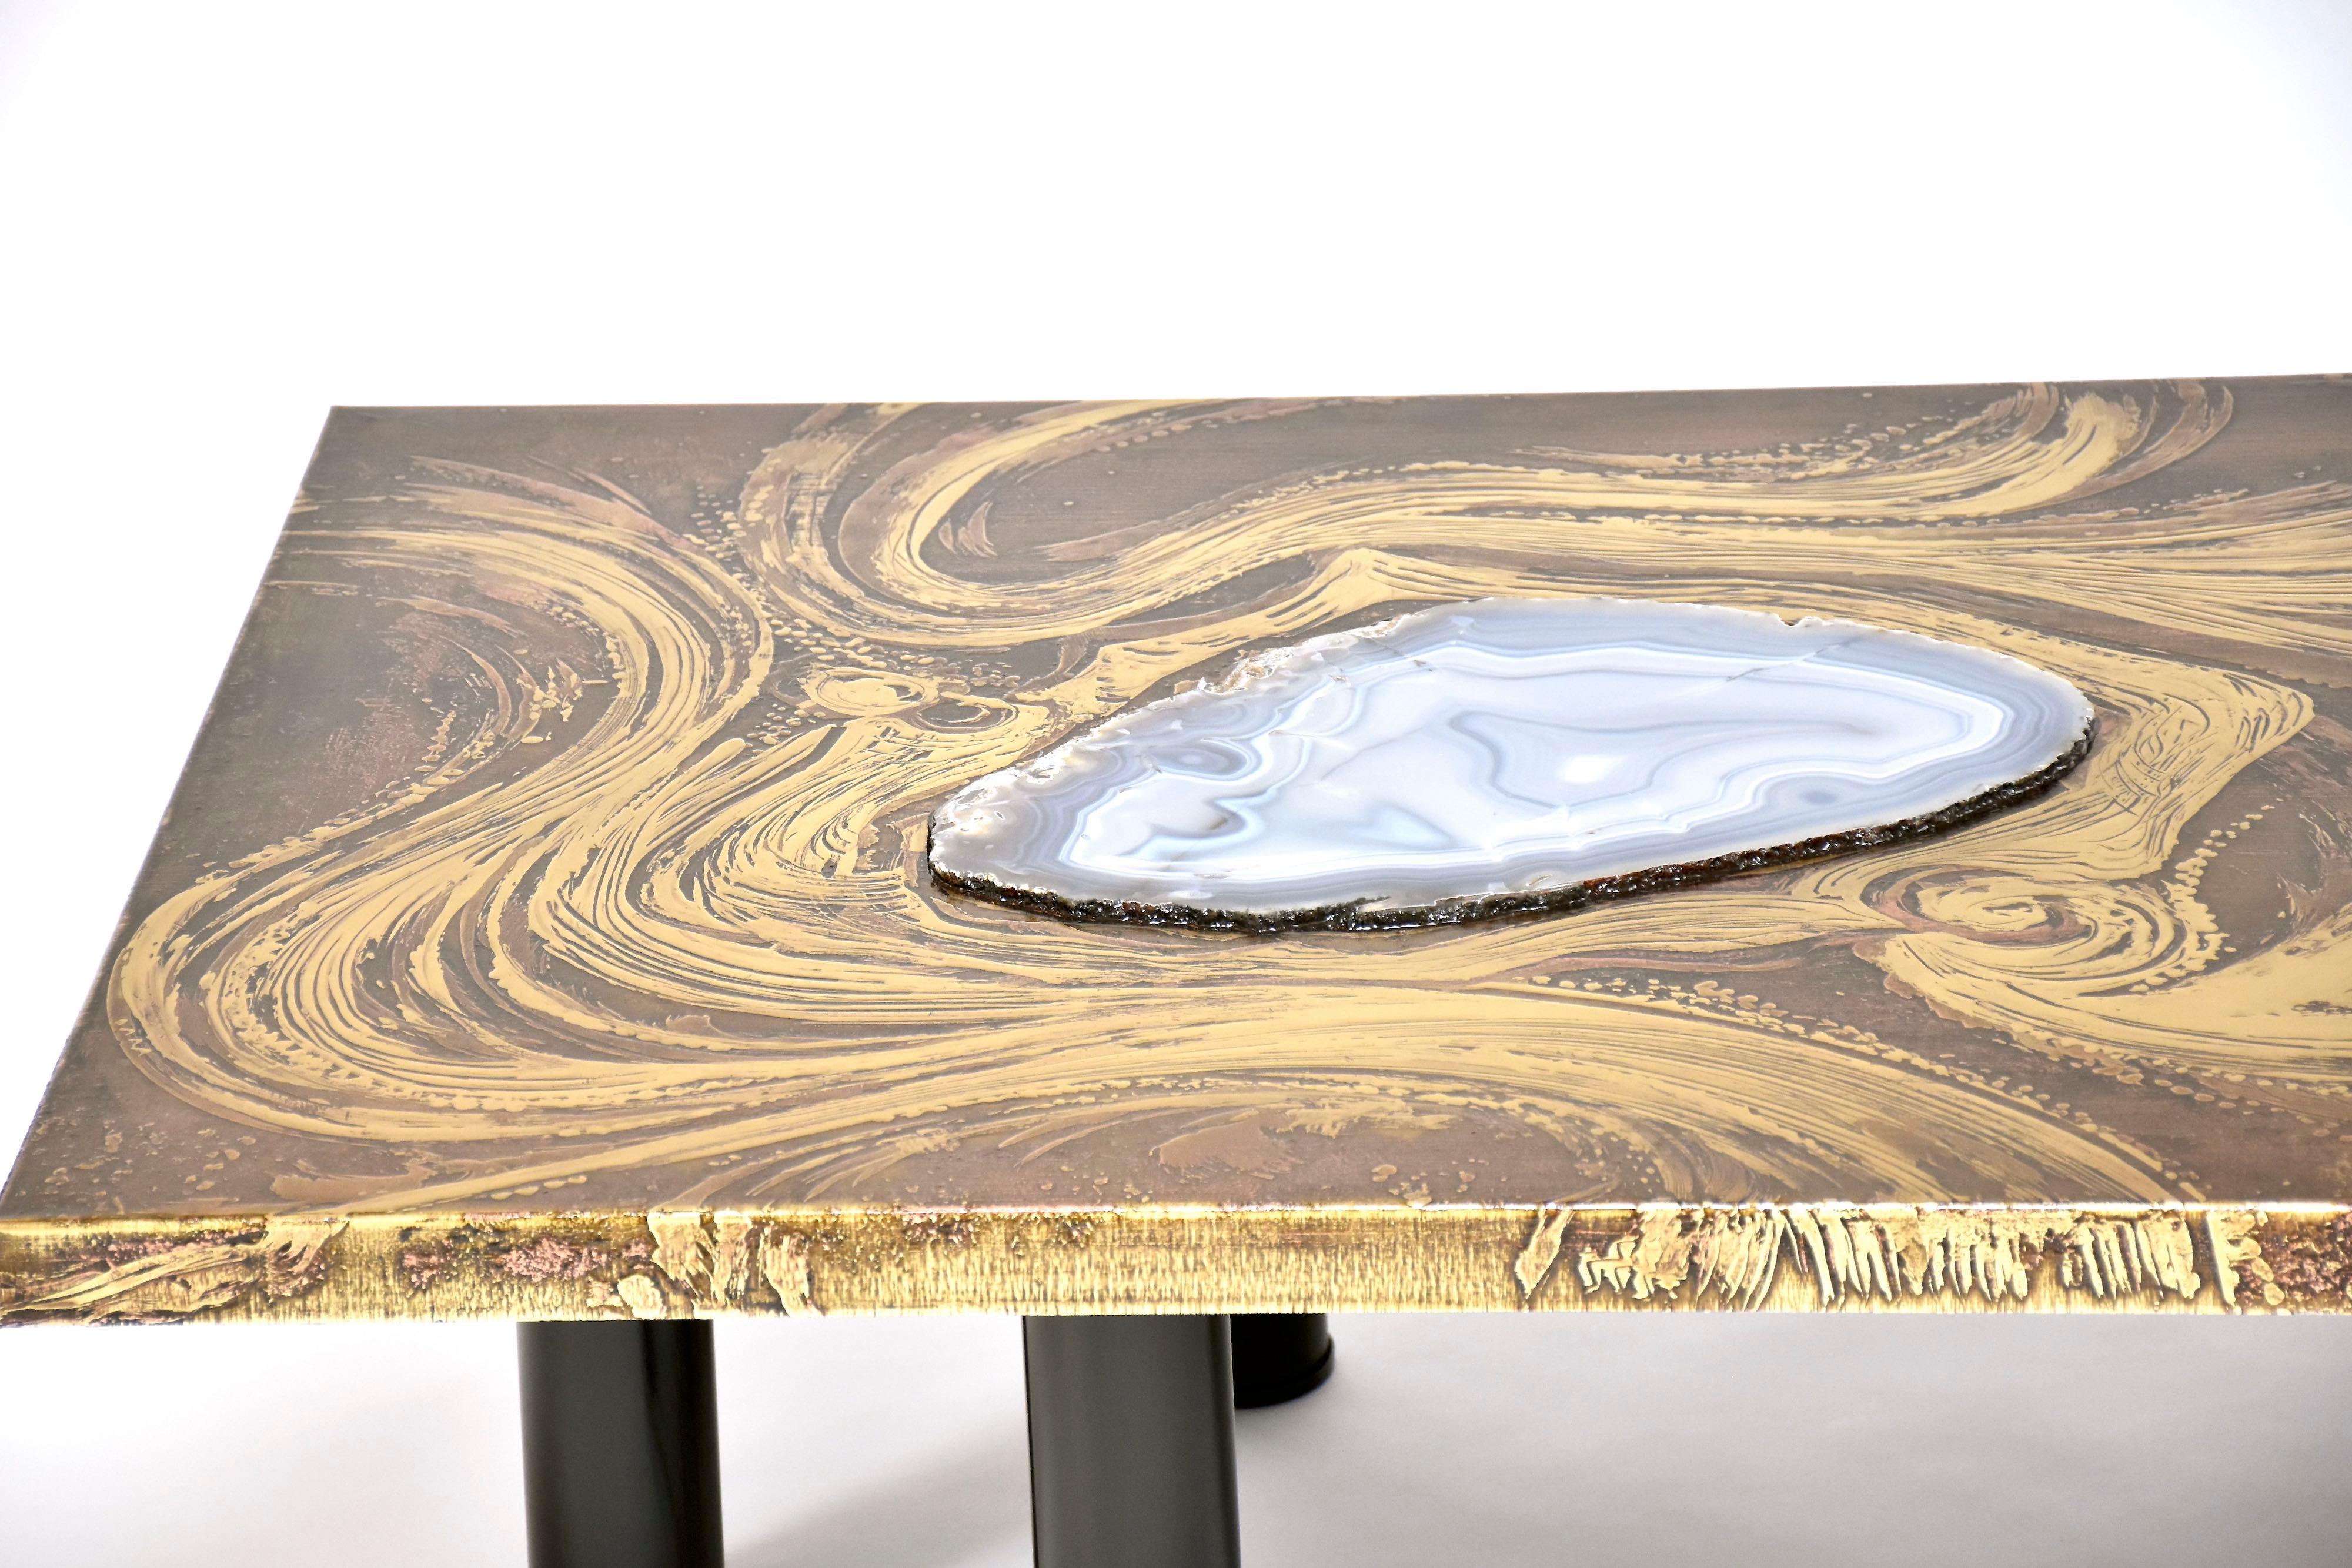 Stunning design coffee table by Belgian artist Marc D'Haenens.
Brass etched top with decor and blue agate inlay resting on 6 black legs.
Signed by the artist.
We bought the table from the daughter of the artist. 
The table was standing in the